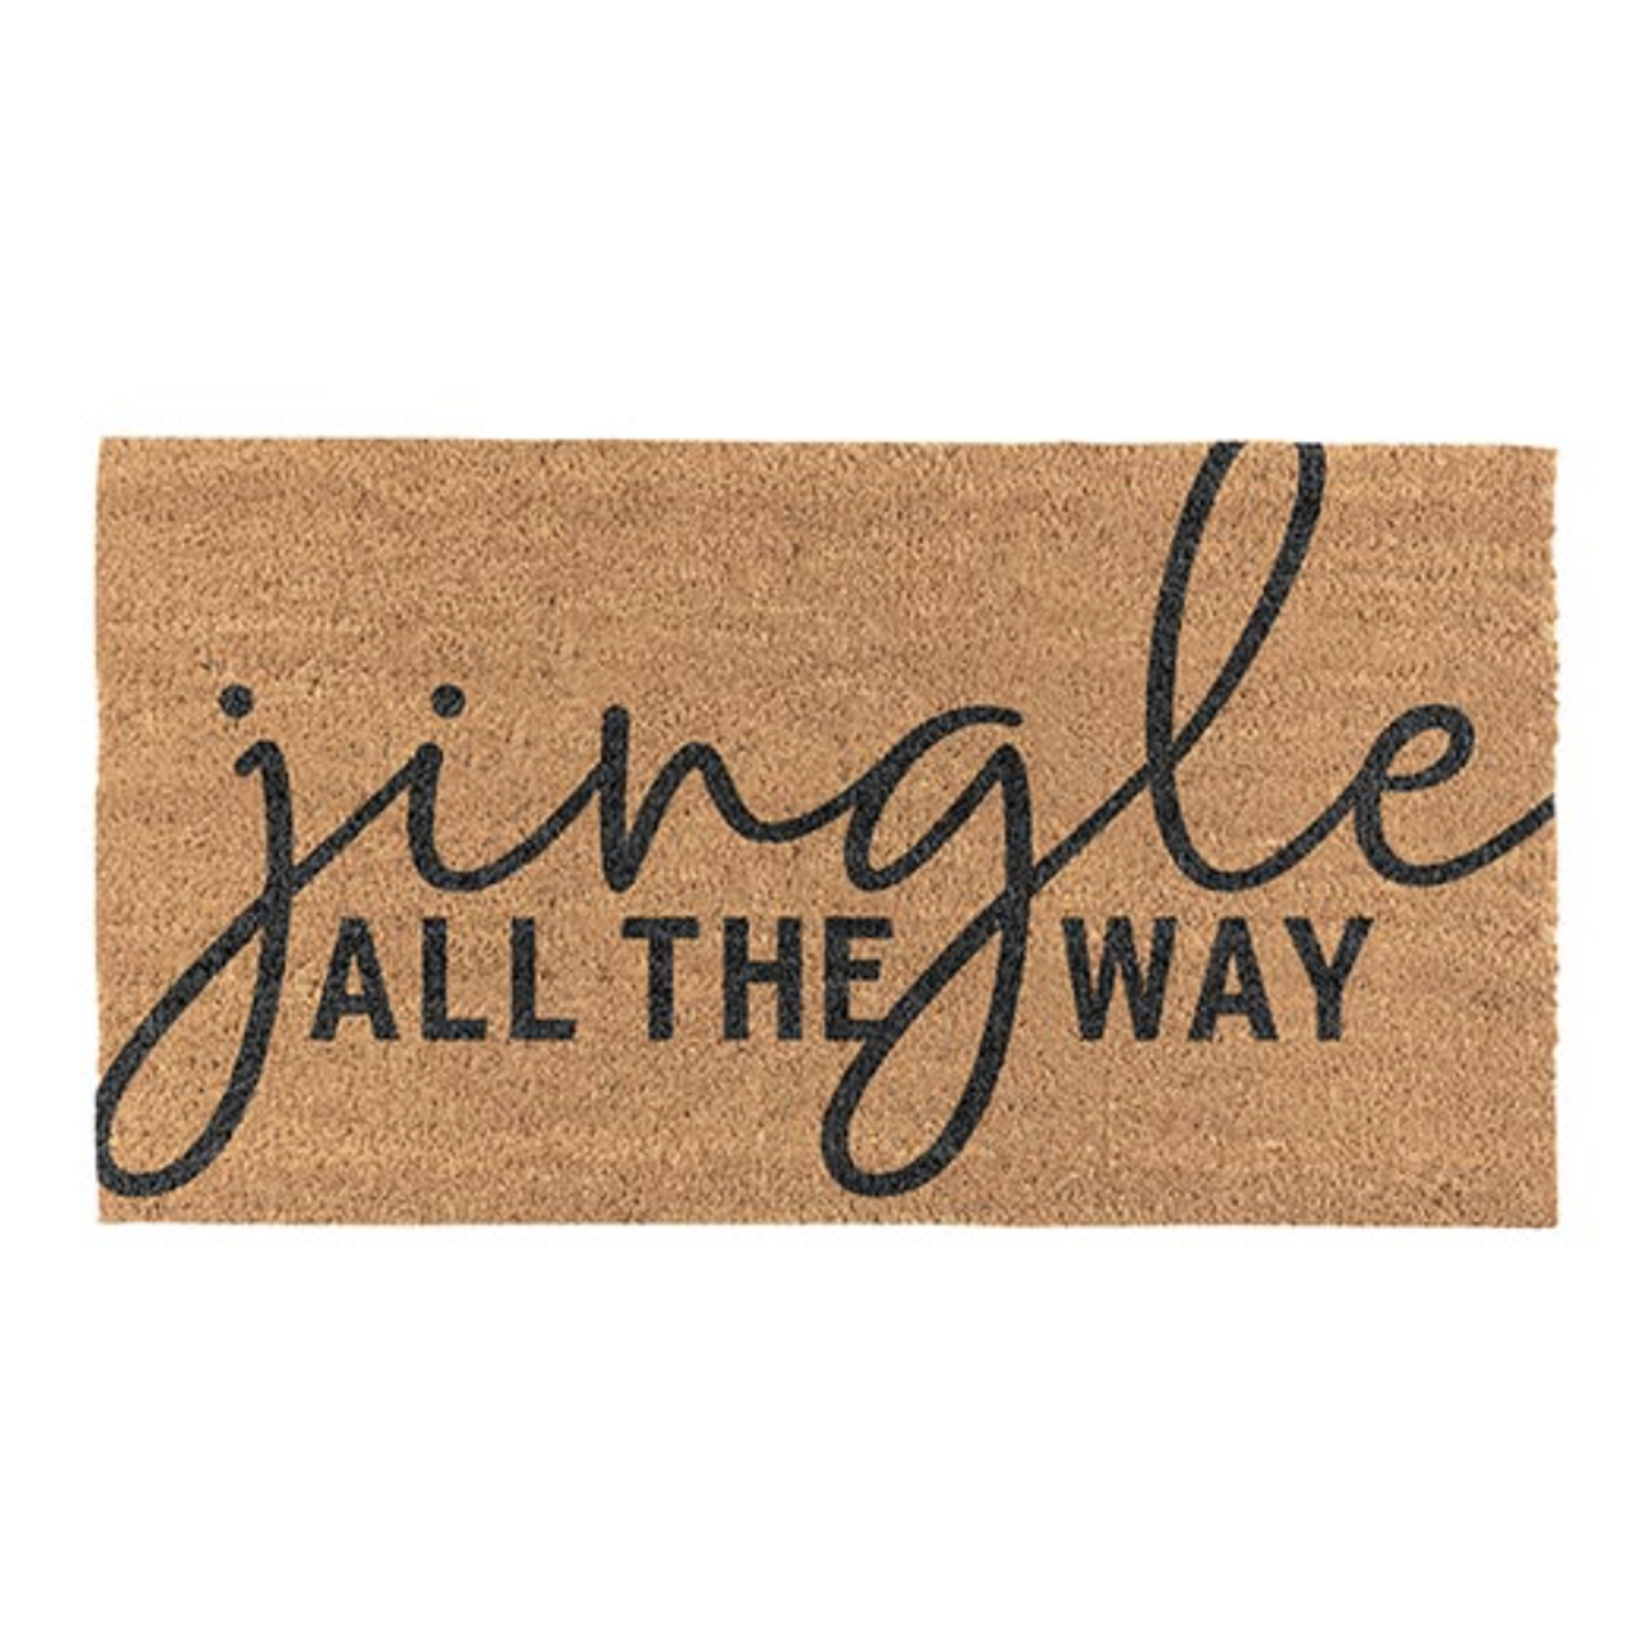 Outside The Box 30x16 "Jingle All The Way" Doormat